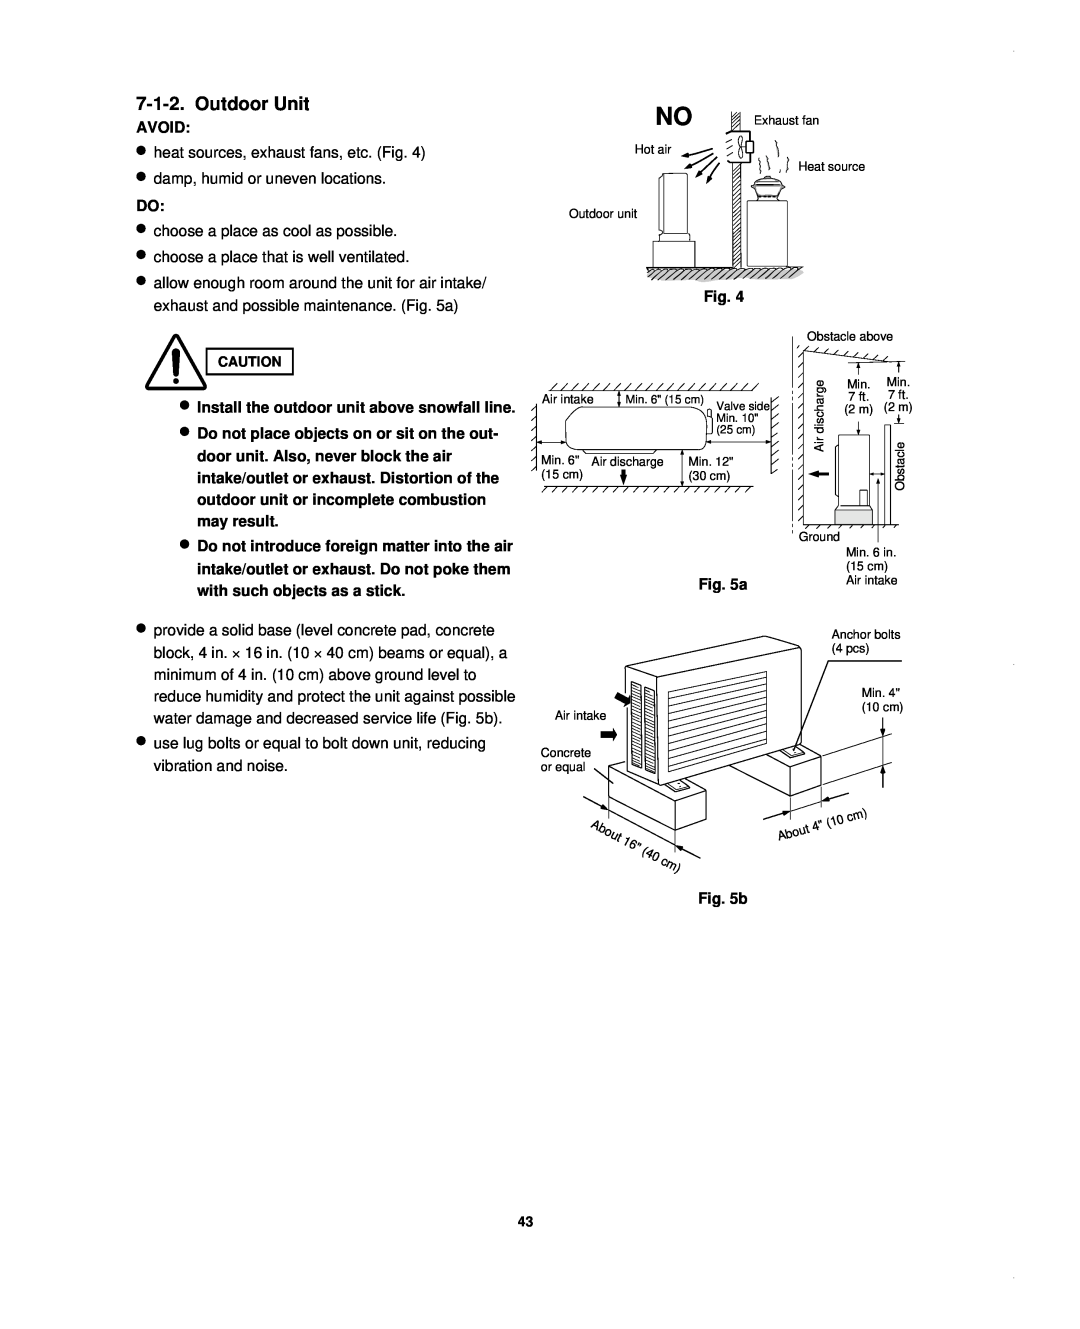 Sanyo KHS1852-S, CH1852, CH0952 service manual Outdoor Unit, Avoid, Install the outdoor unit above snowfall line 